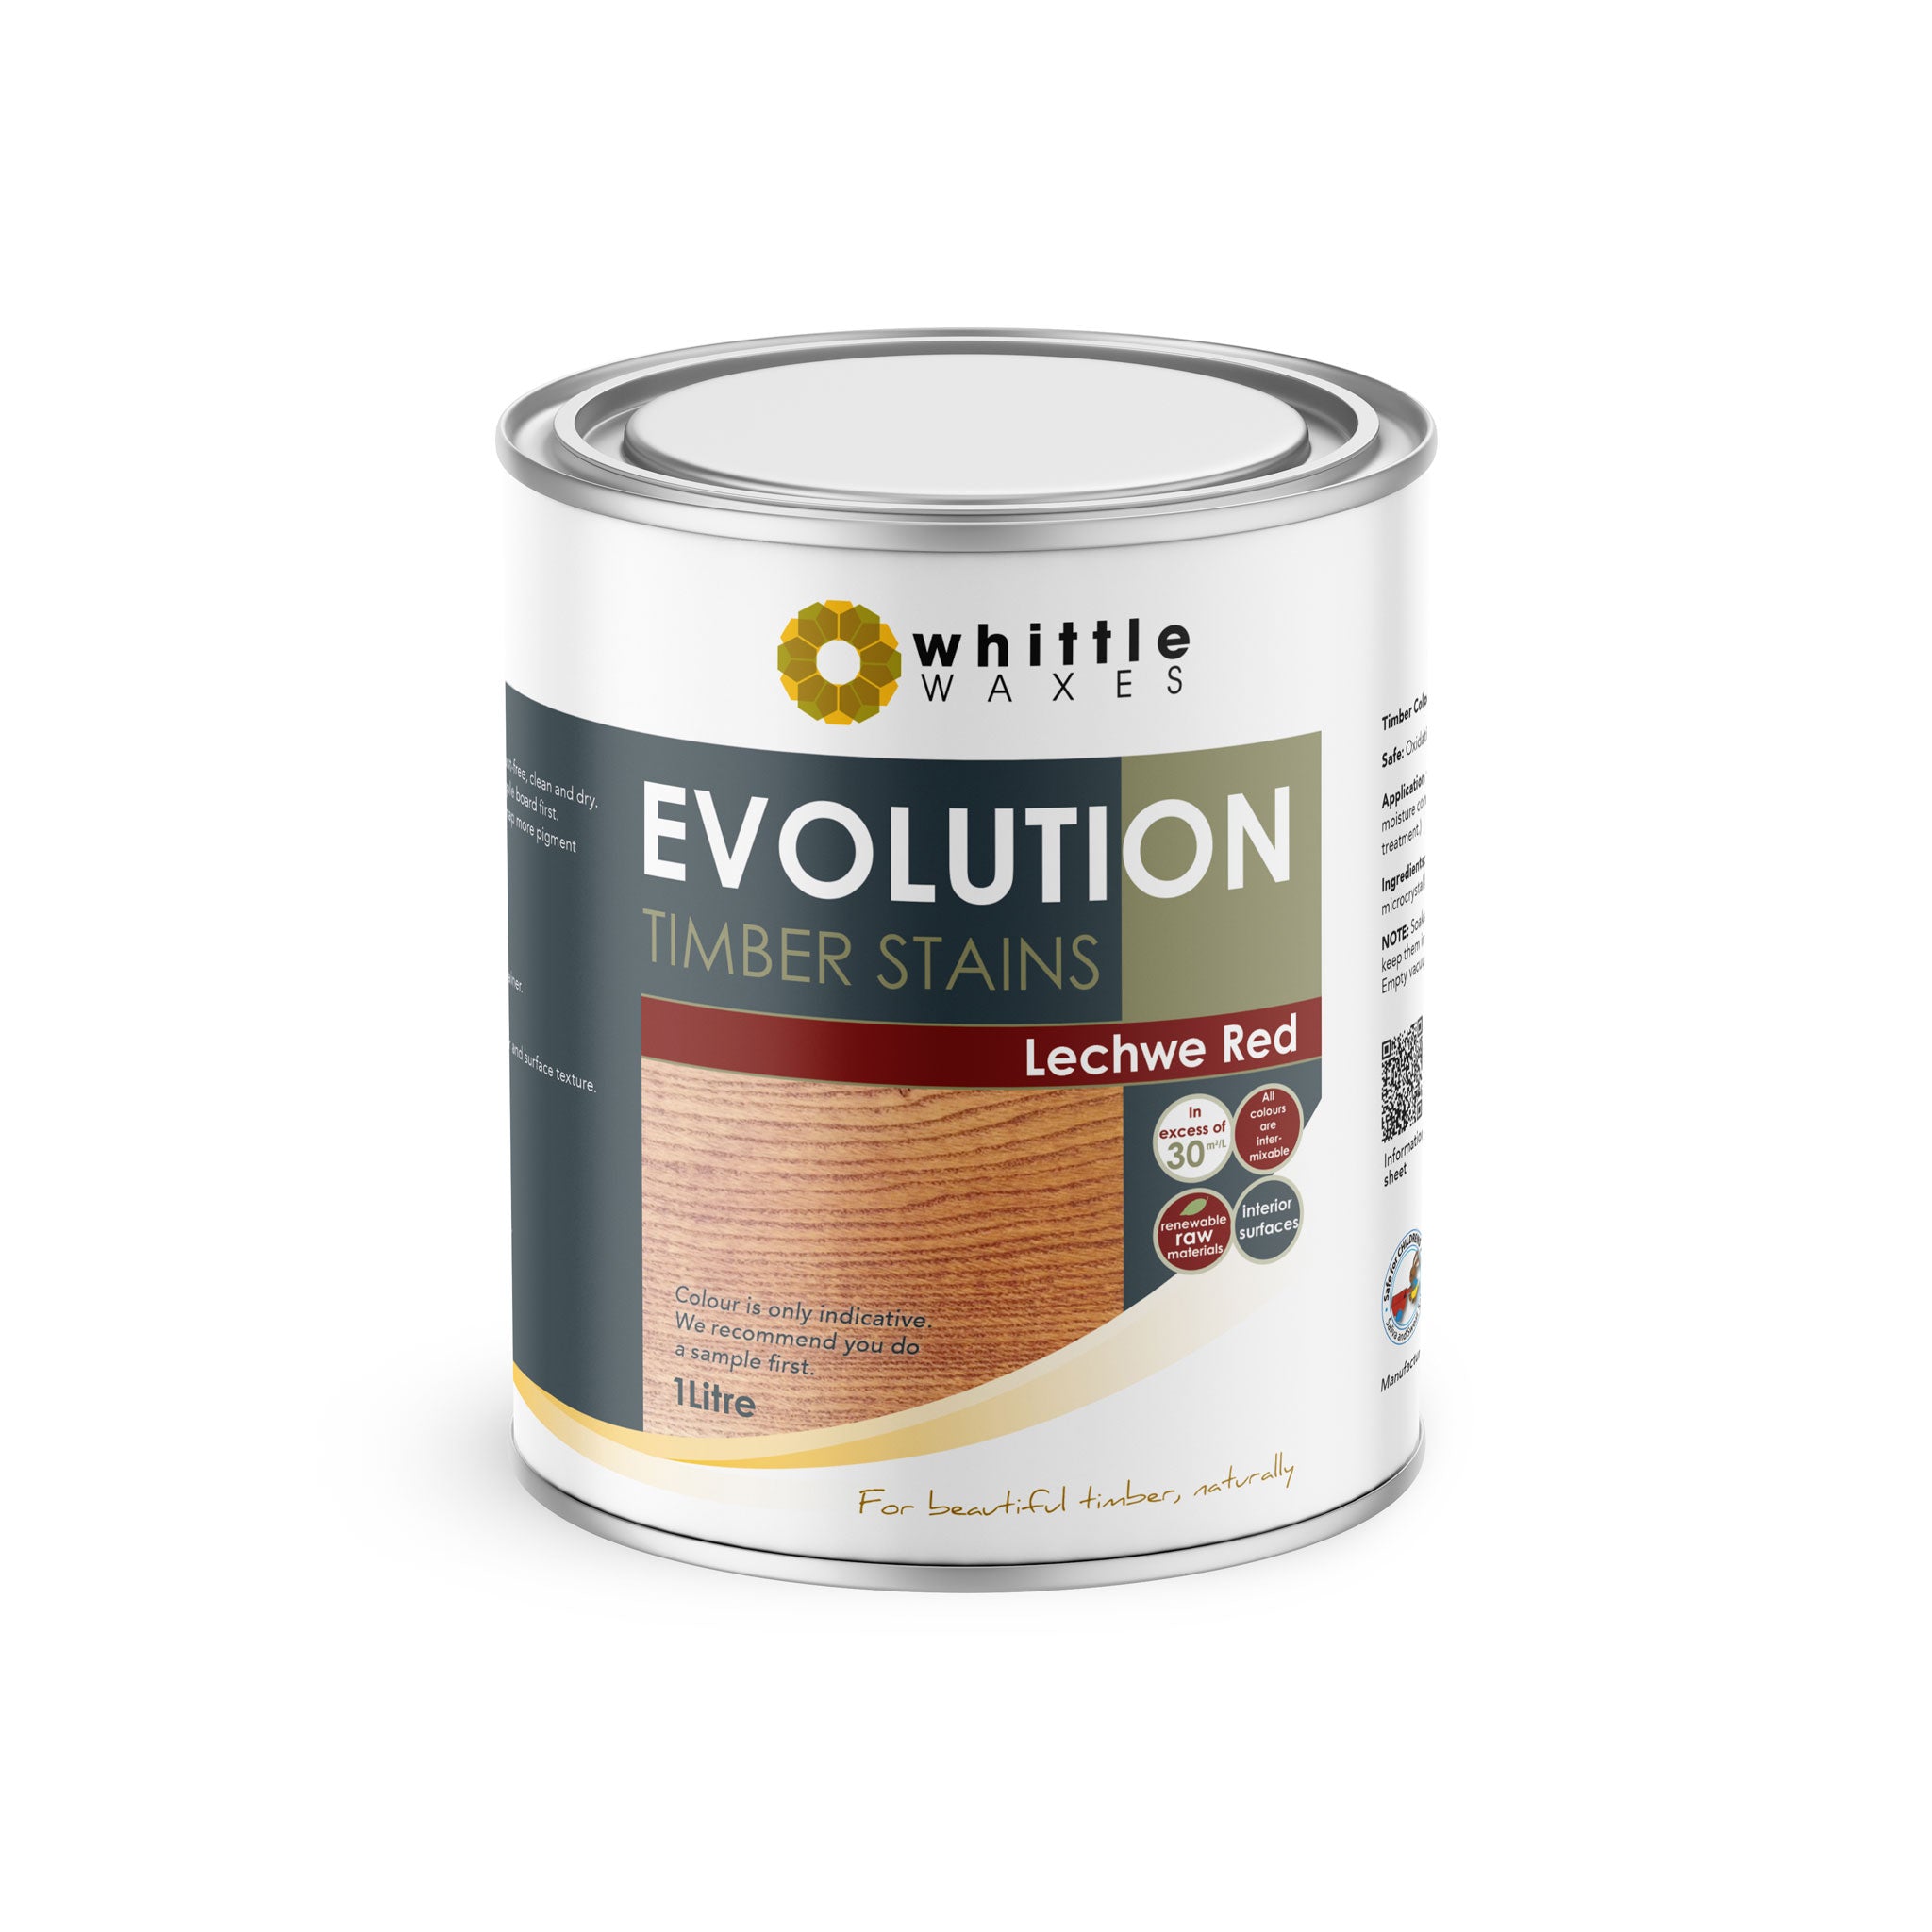 Whittle Waxes Evolution Colours (Lechwe Red) - quality timber stain - 1 Litre